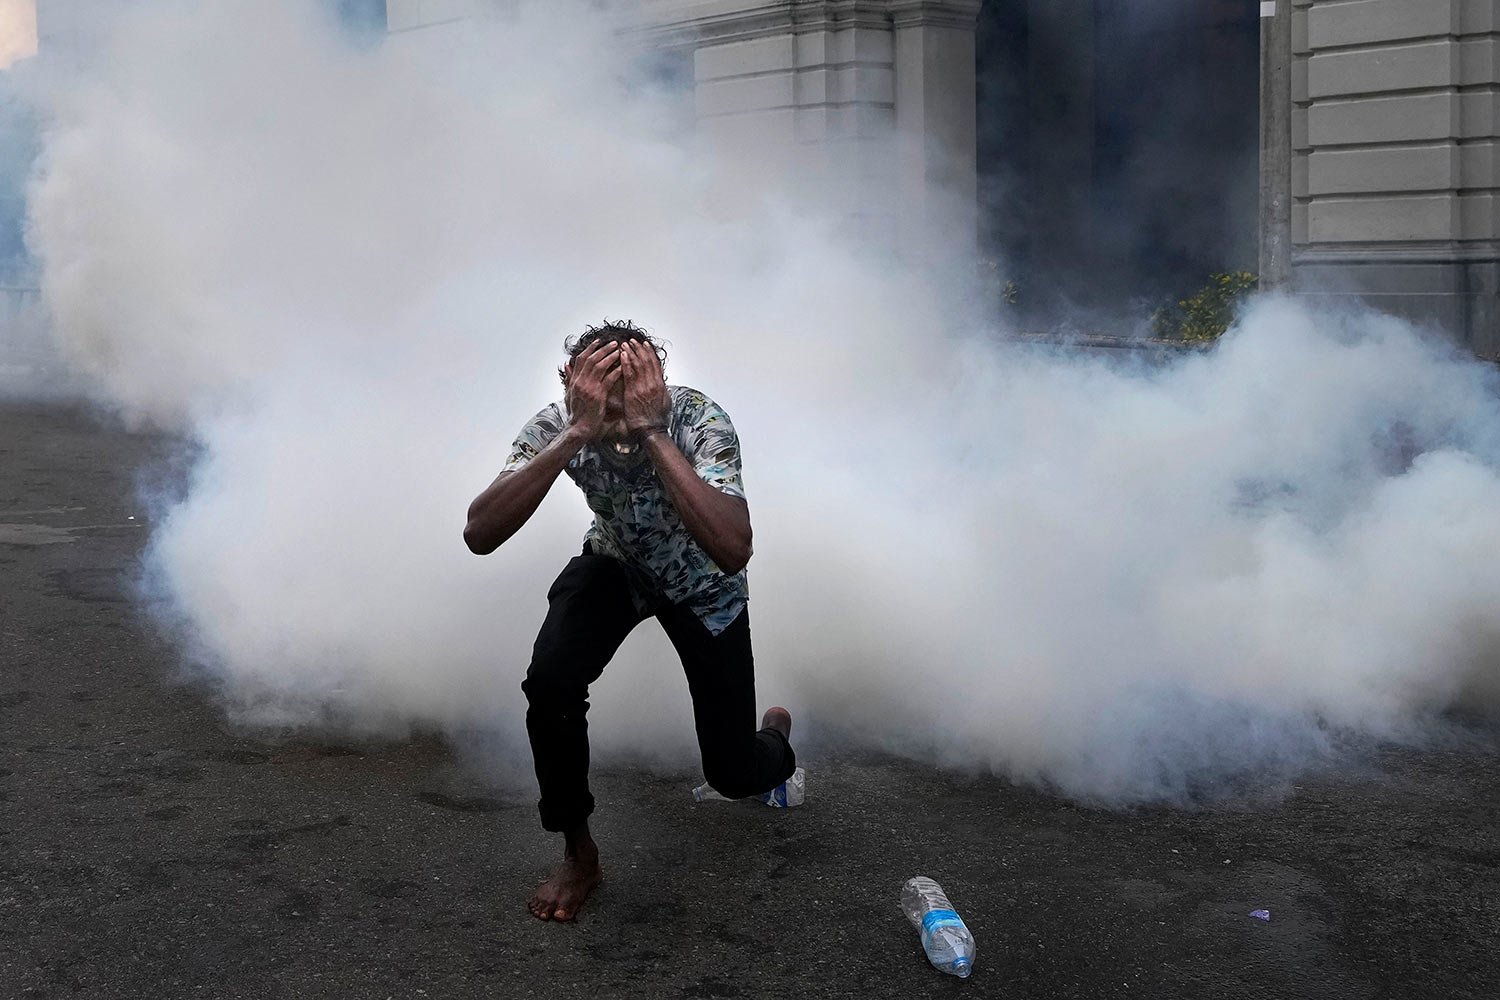  A man runs  from tear gas fired by police to disperse anti-government protesters near police headquarters in Colombo, Sri Lanka, Thursday, June 9, 2022. (AP Photo/Eranga Jayawardena) 